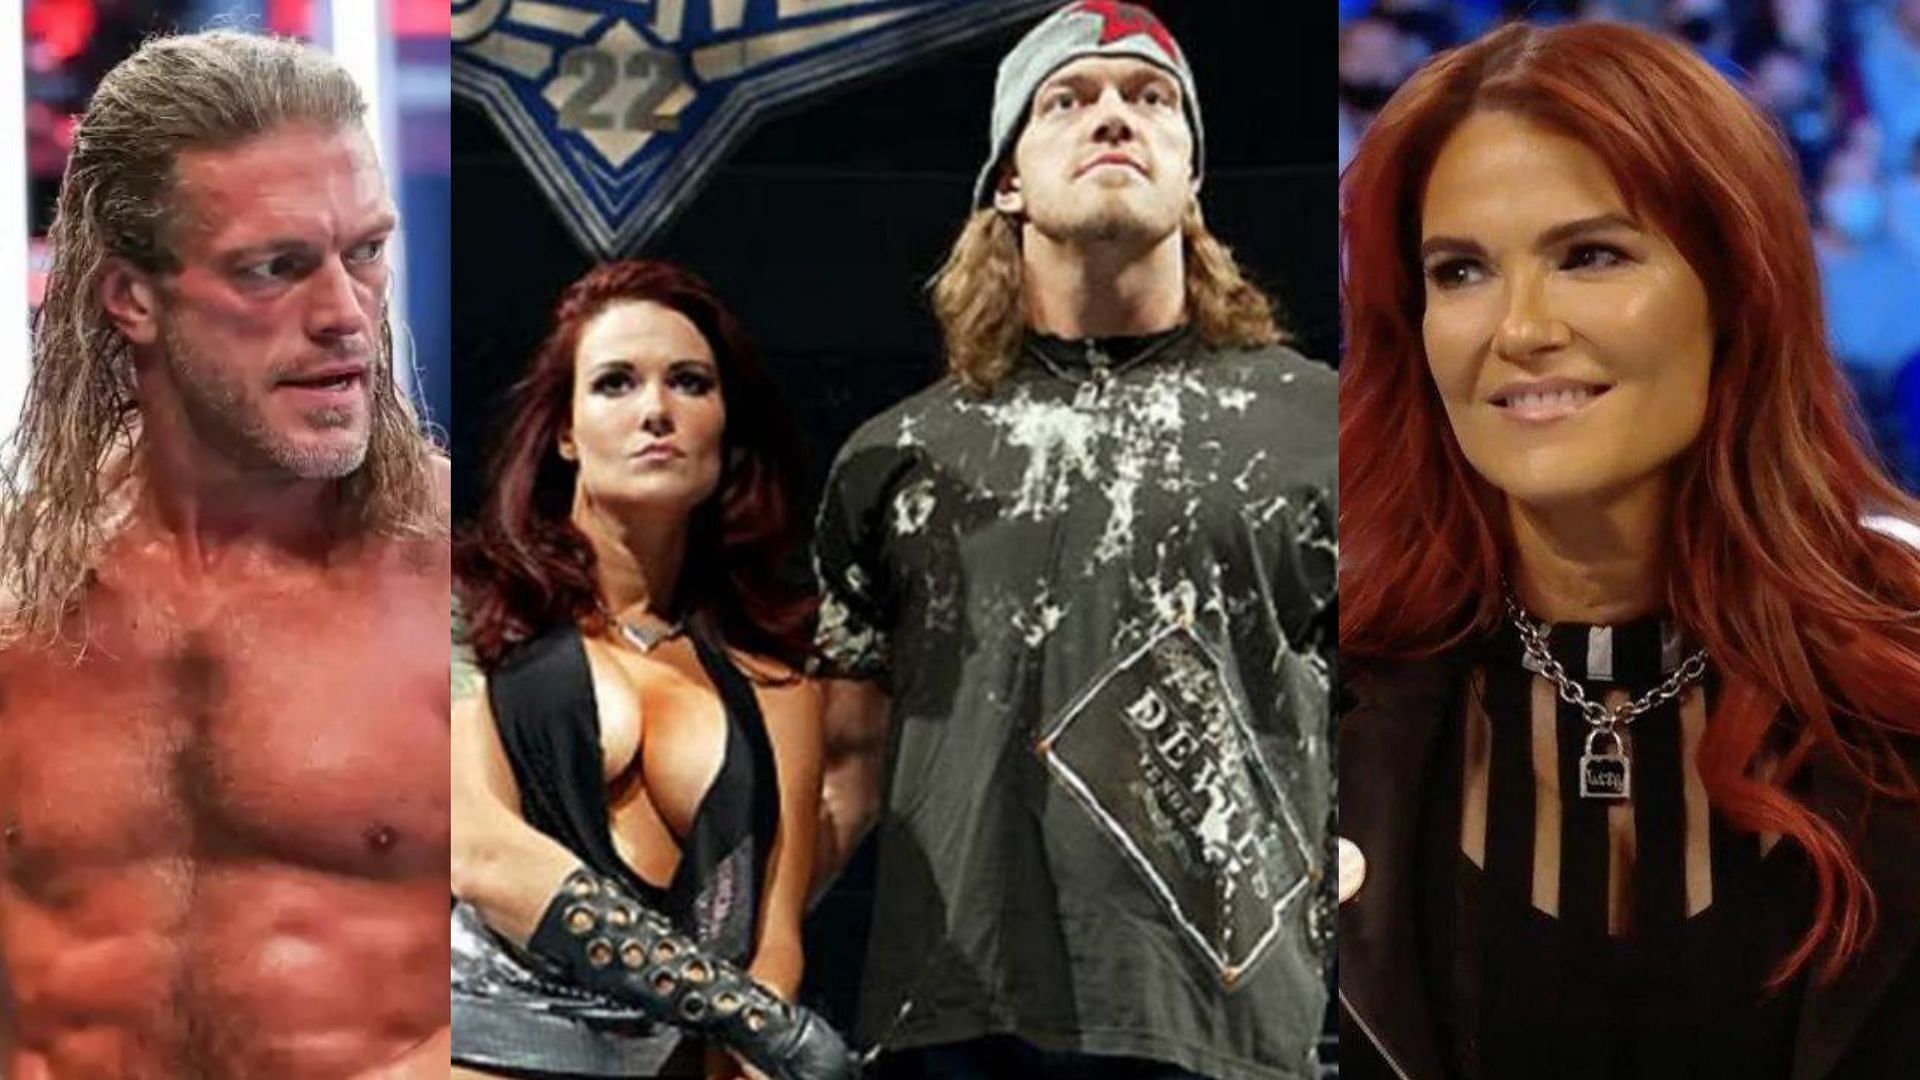 A look into Edge and Lita